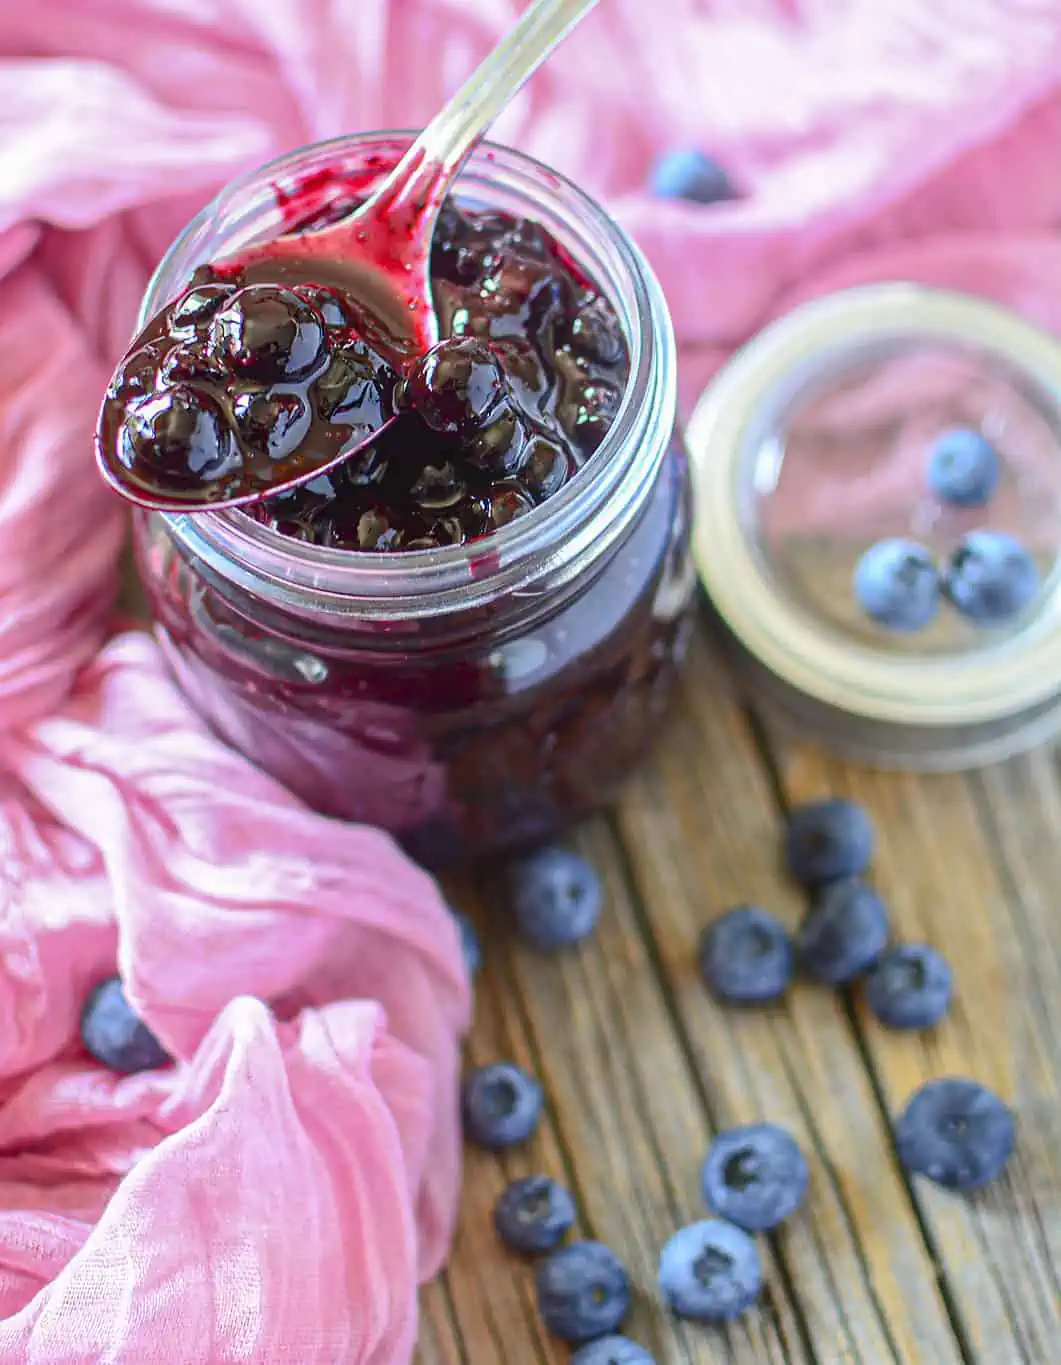 Blueberry pie filling in a glass jar with a spoon on top.